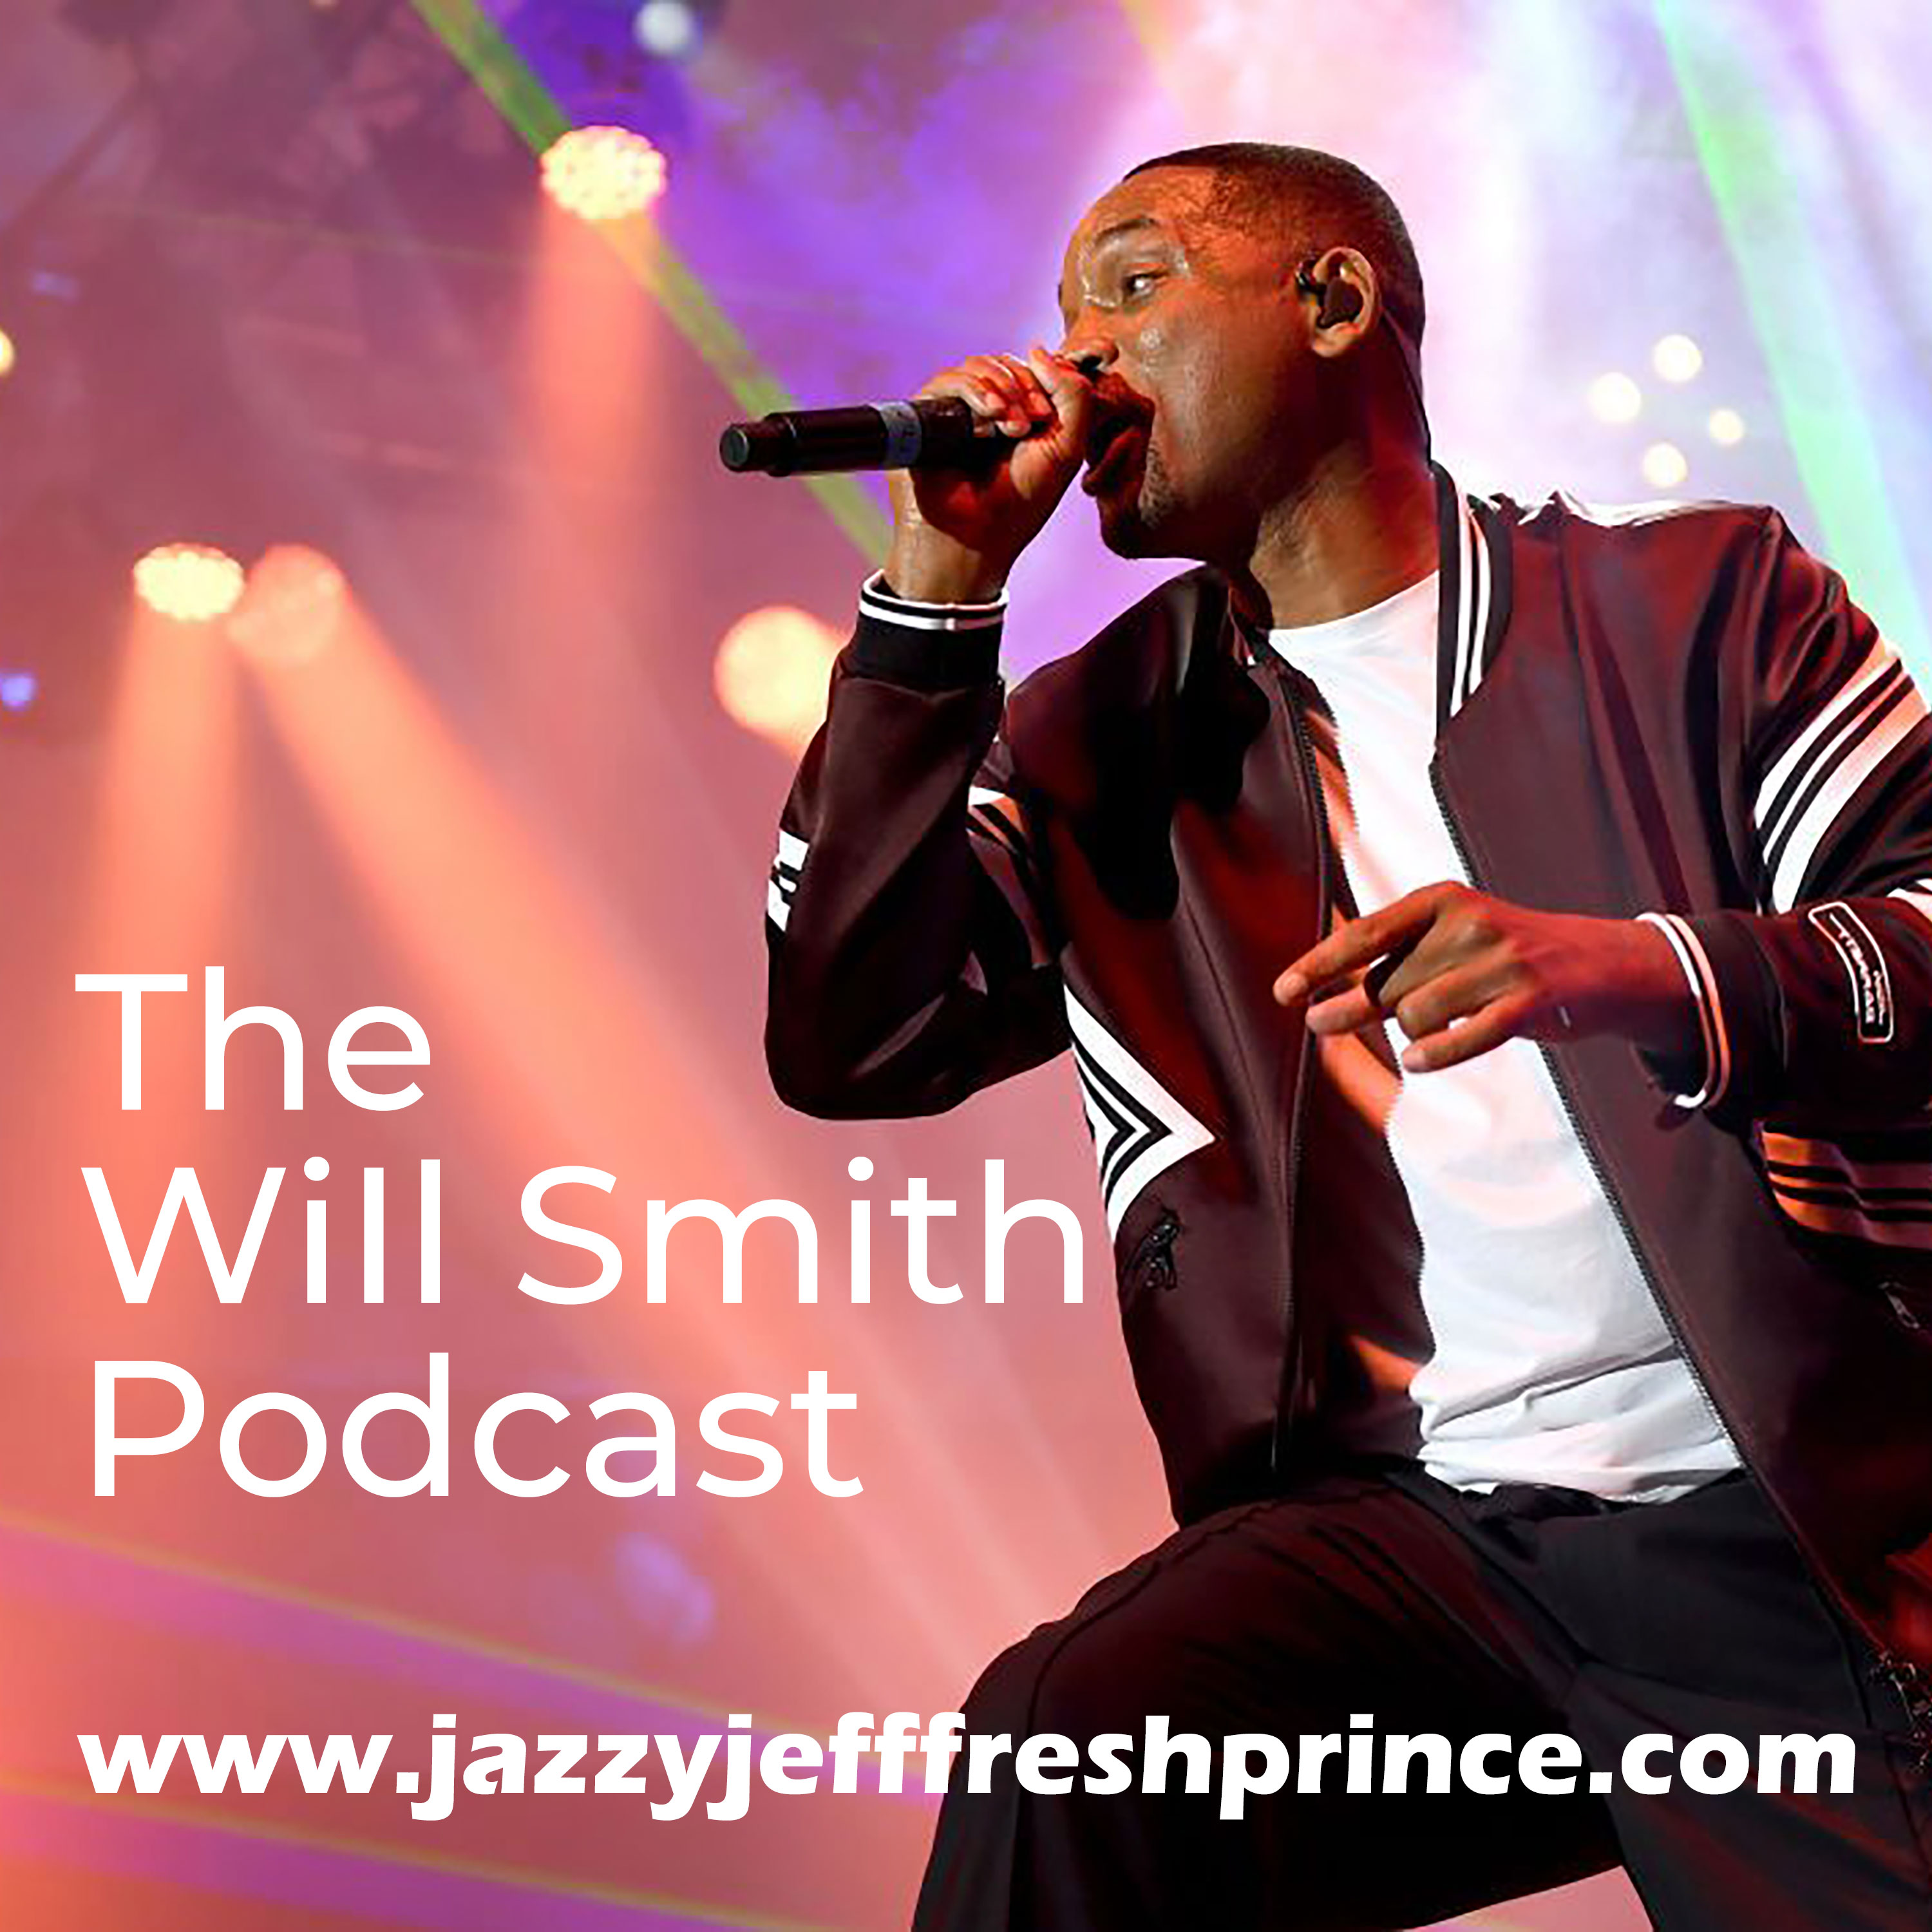 The Will Smith Podcast